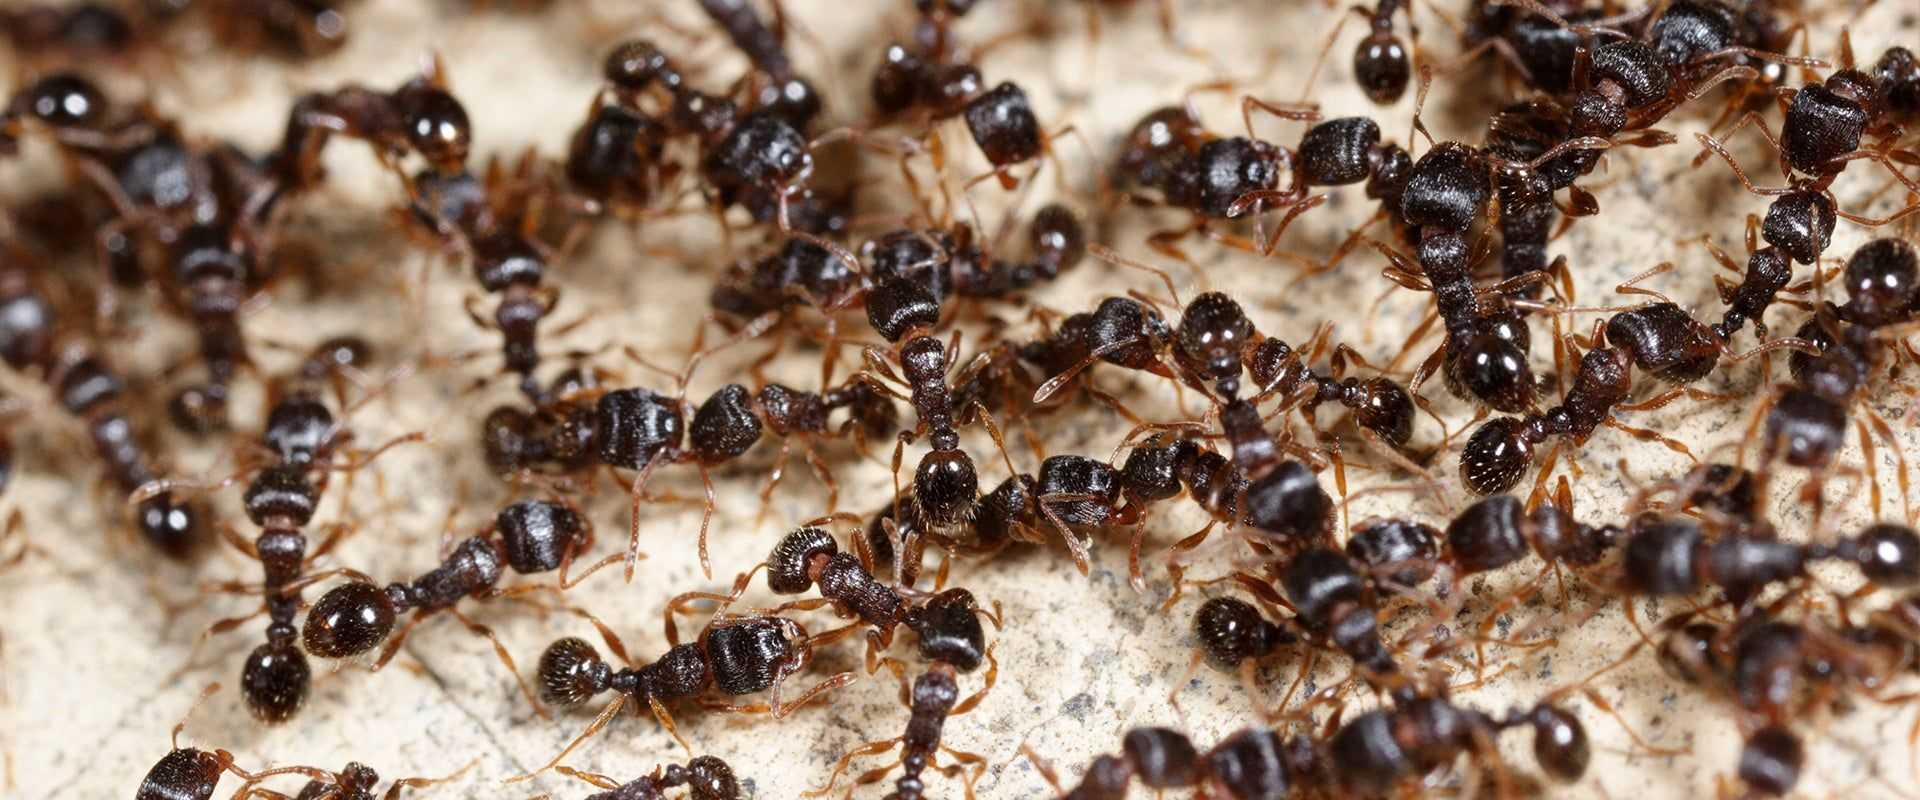 ants in a swarm